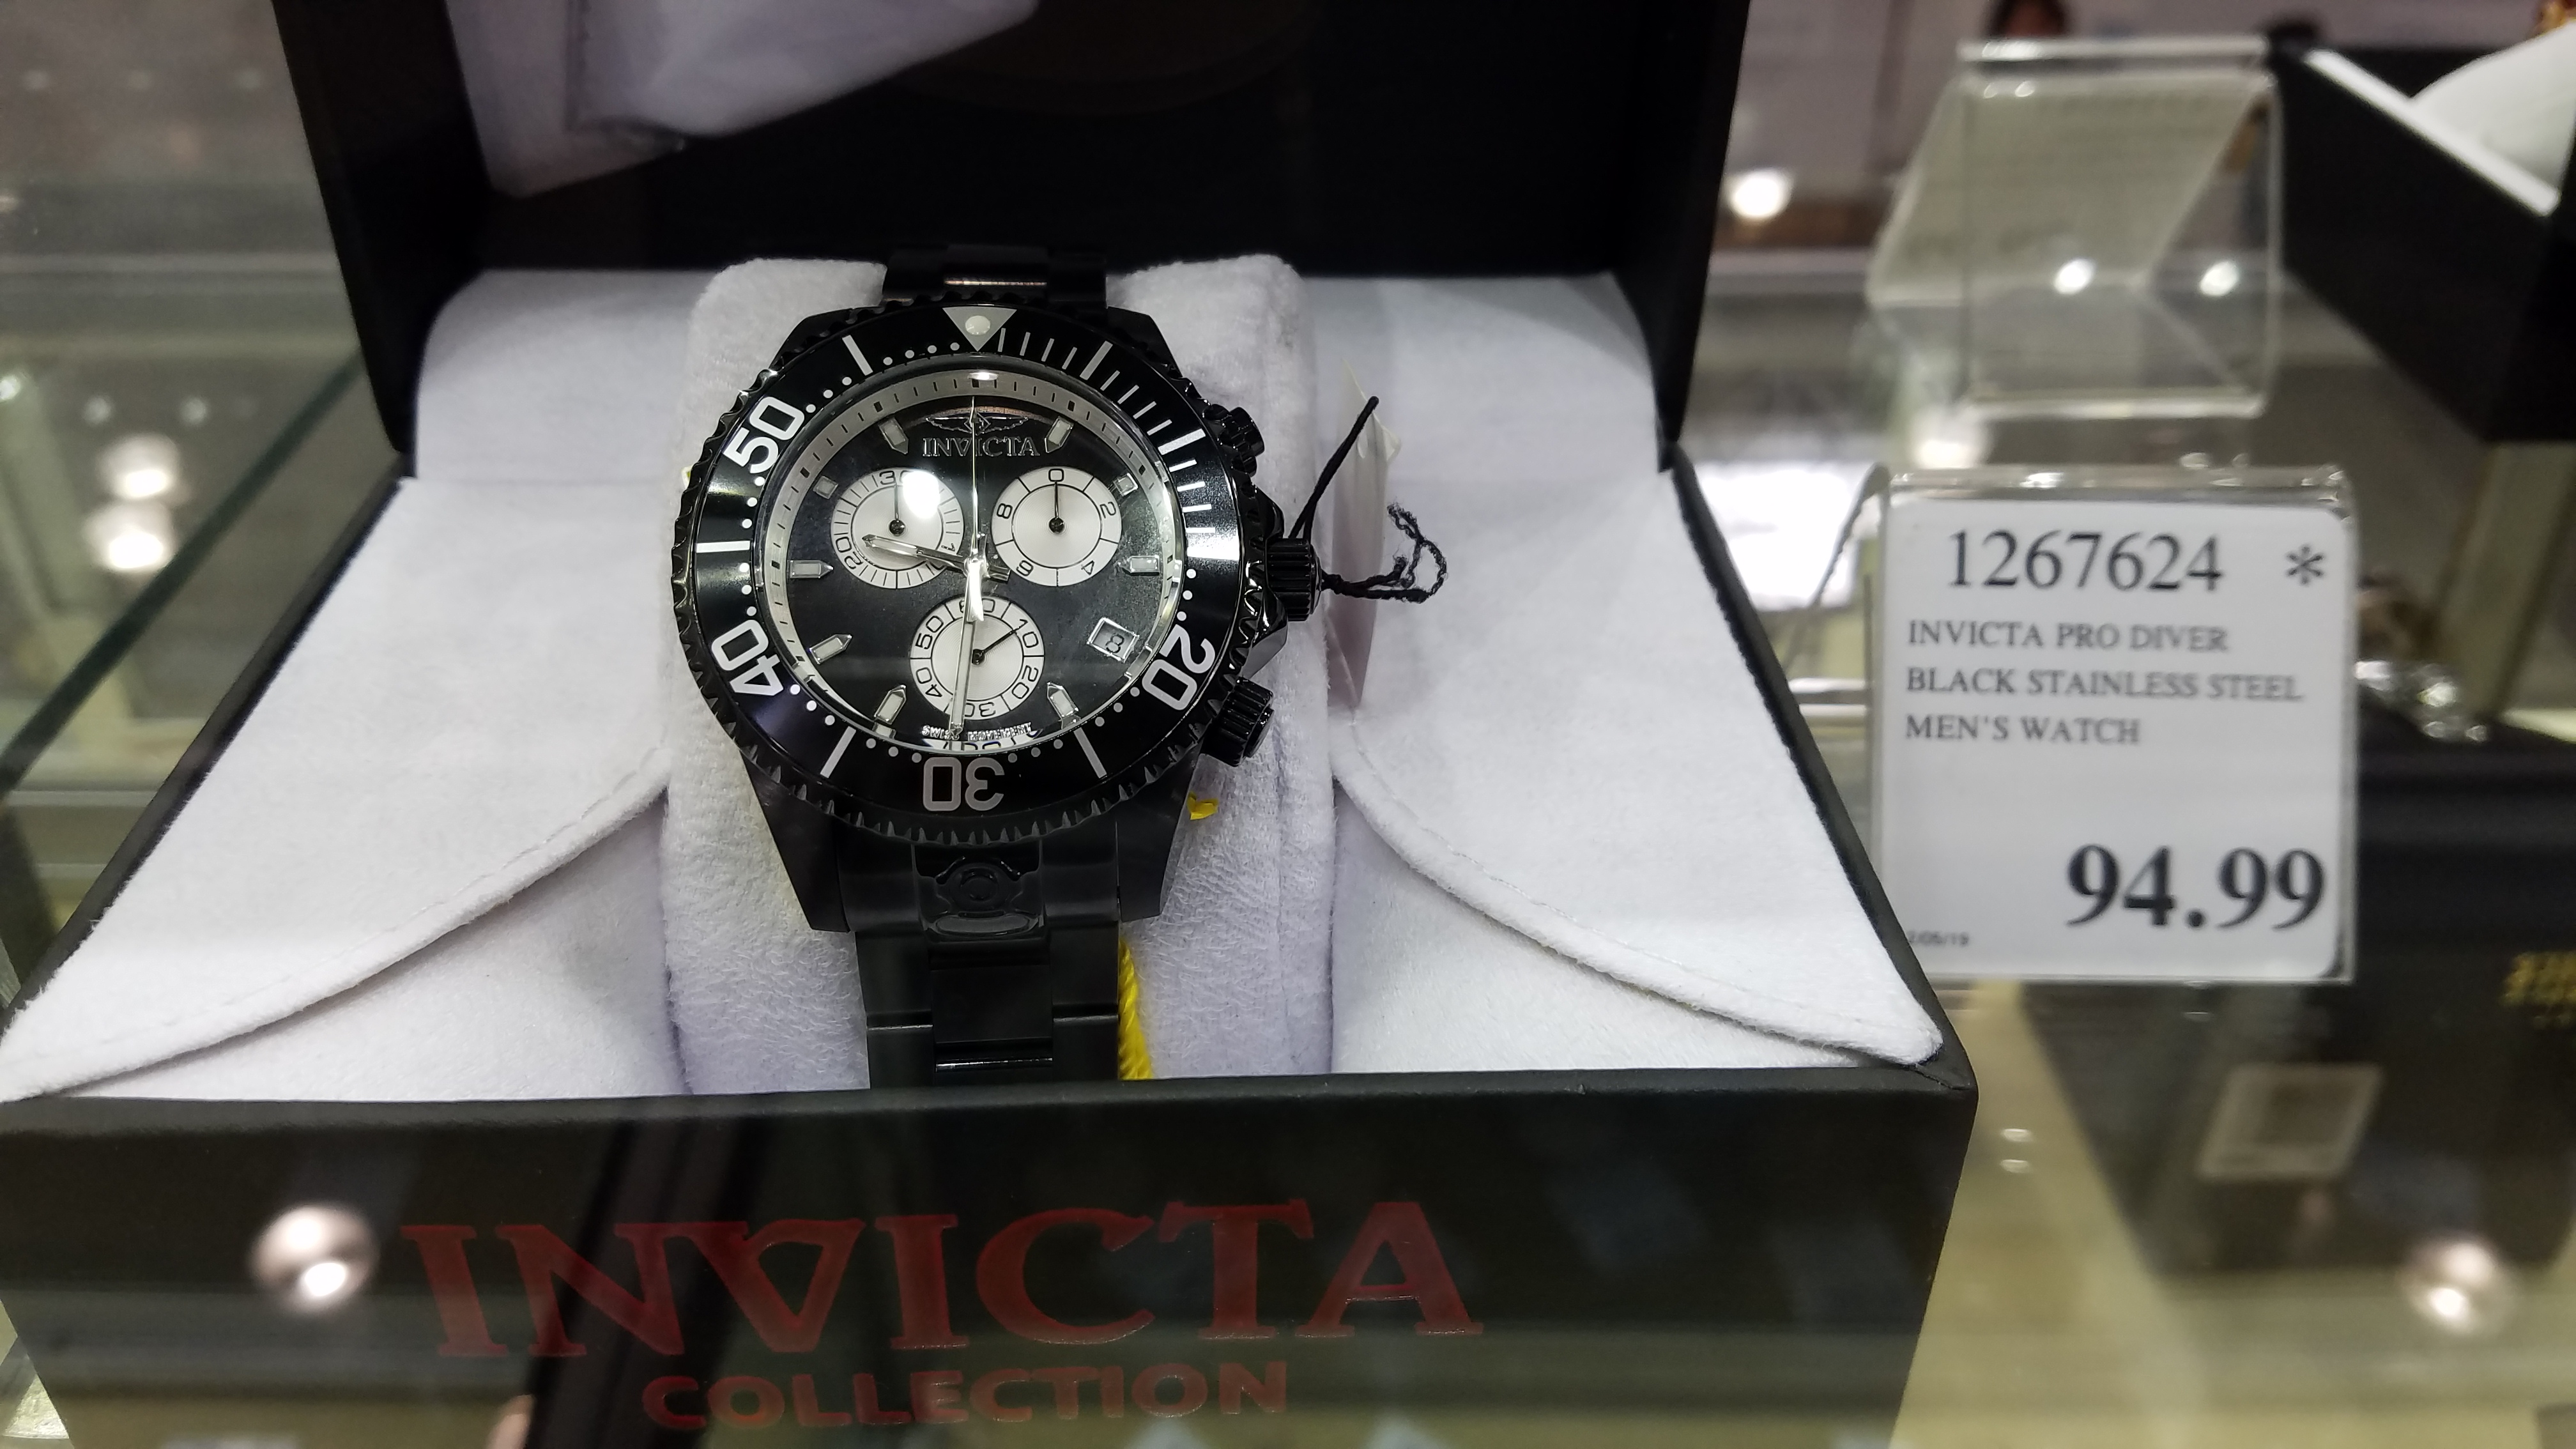 omega watches at costco